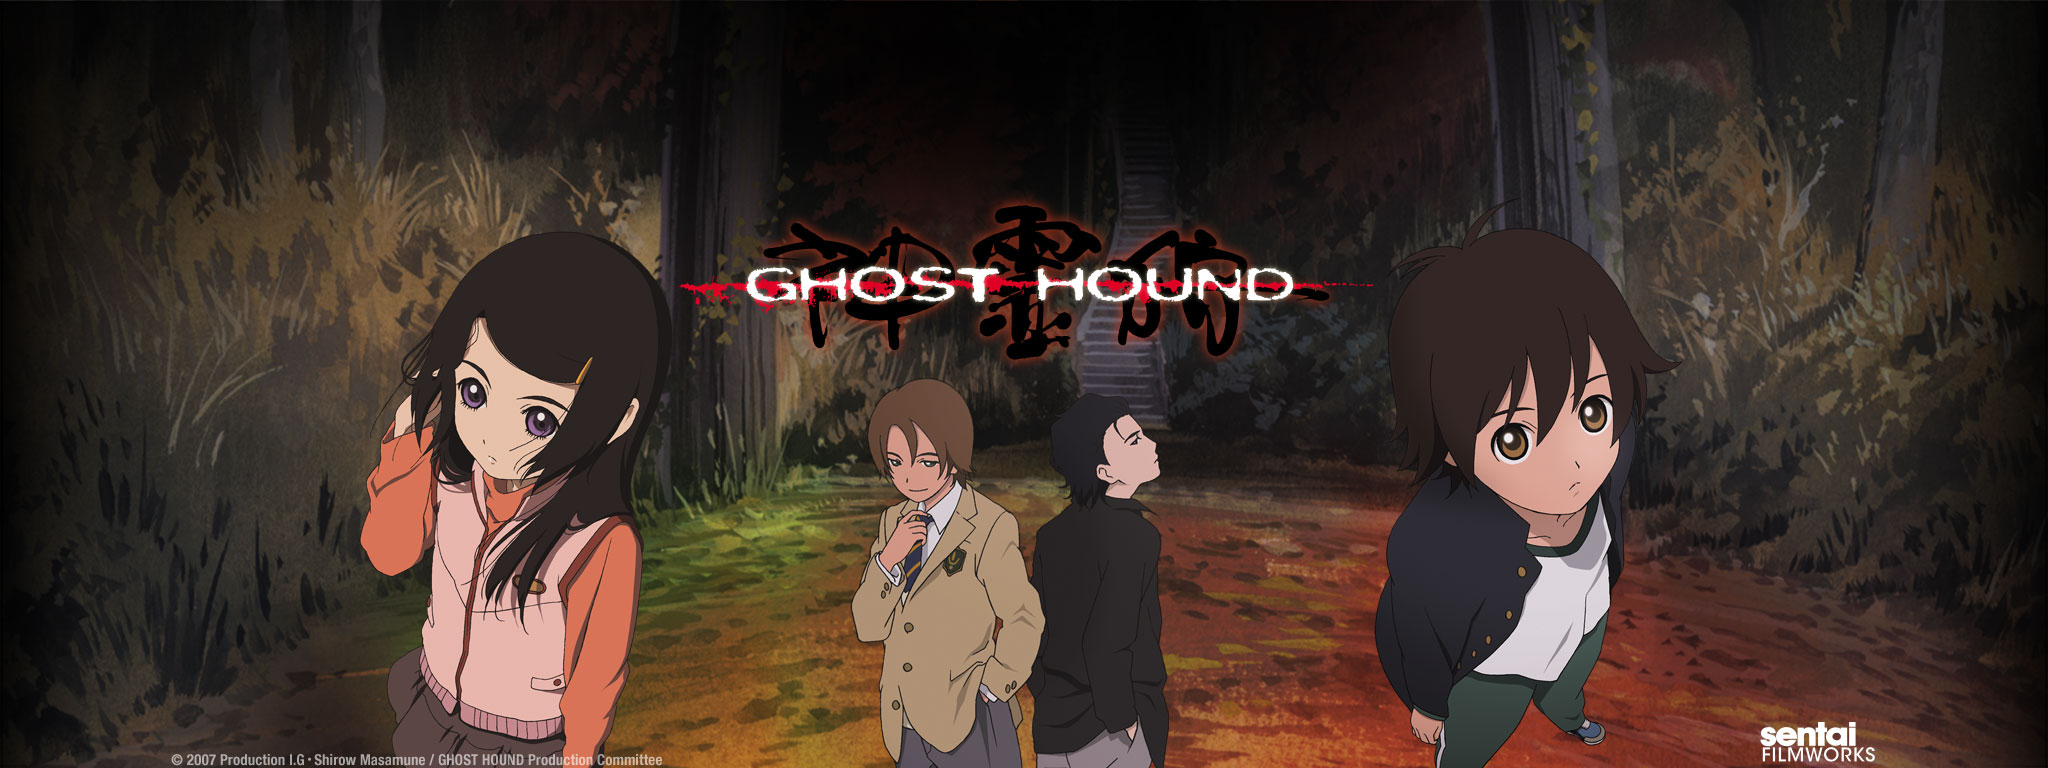 Title Art for Ghost Hound